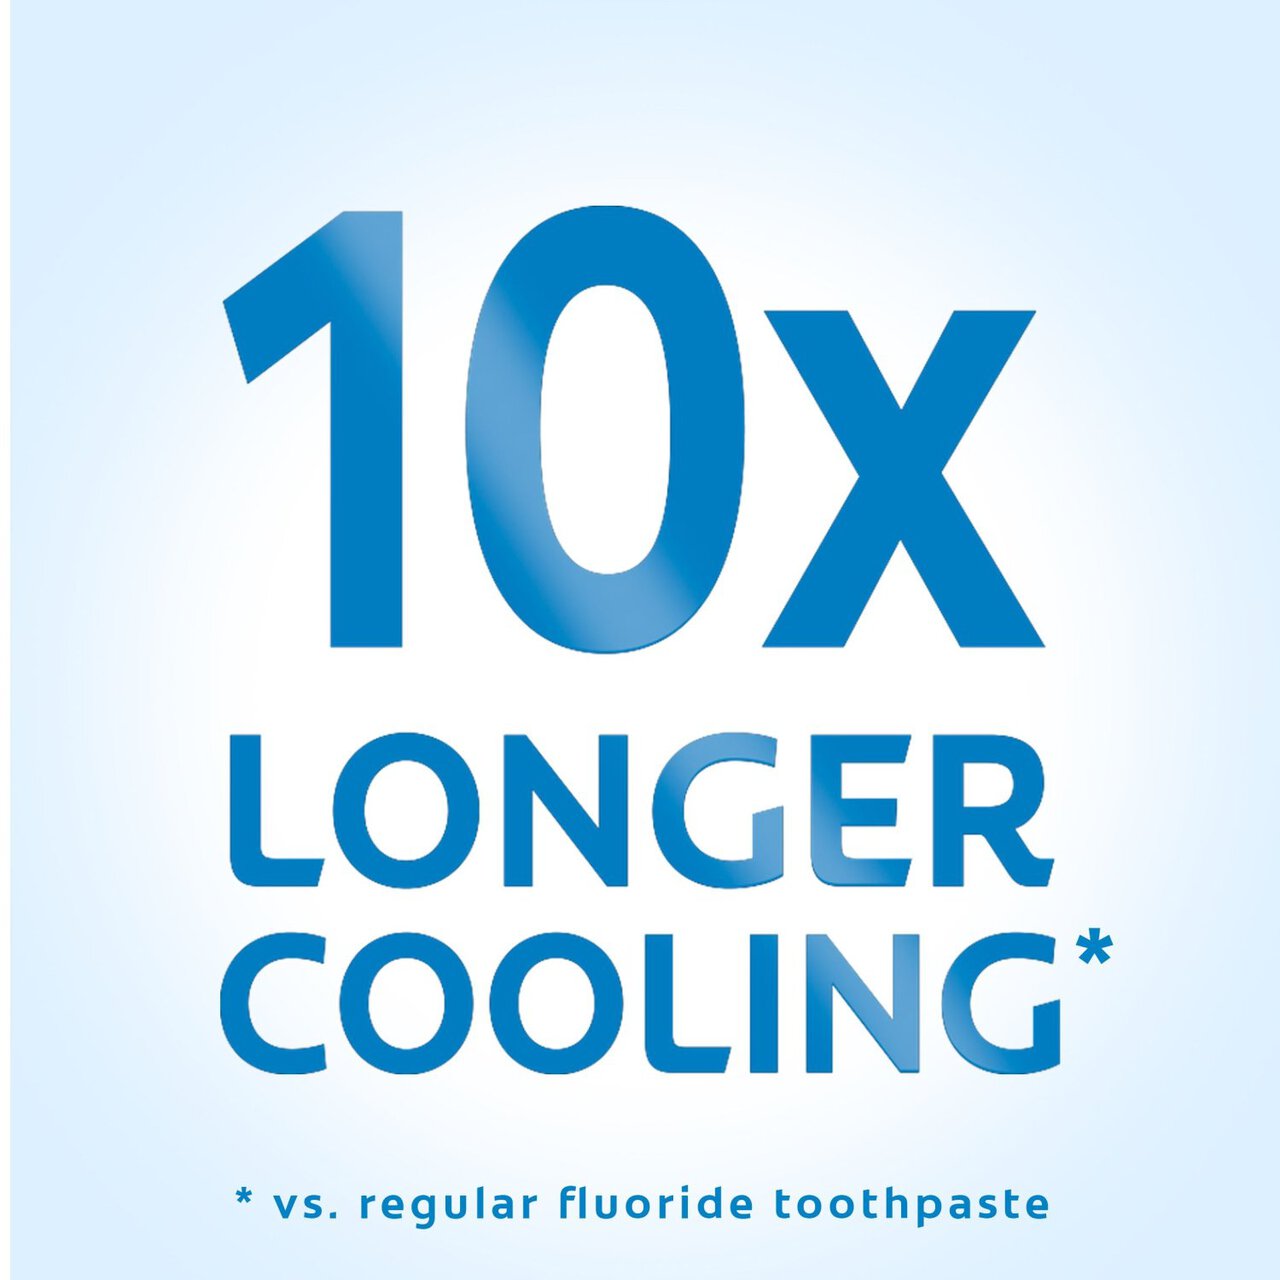 Colgate Max Fresh Cooling Crystals Toothpaste Pump 100ml